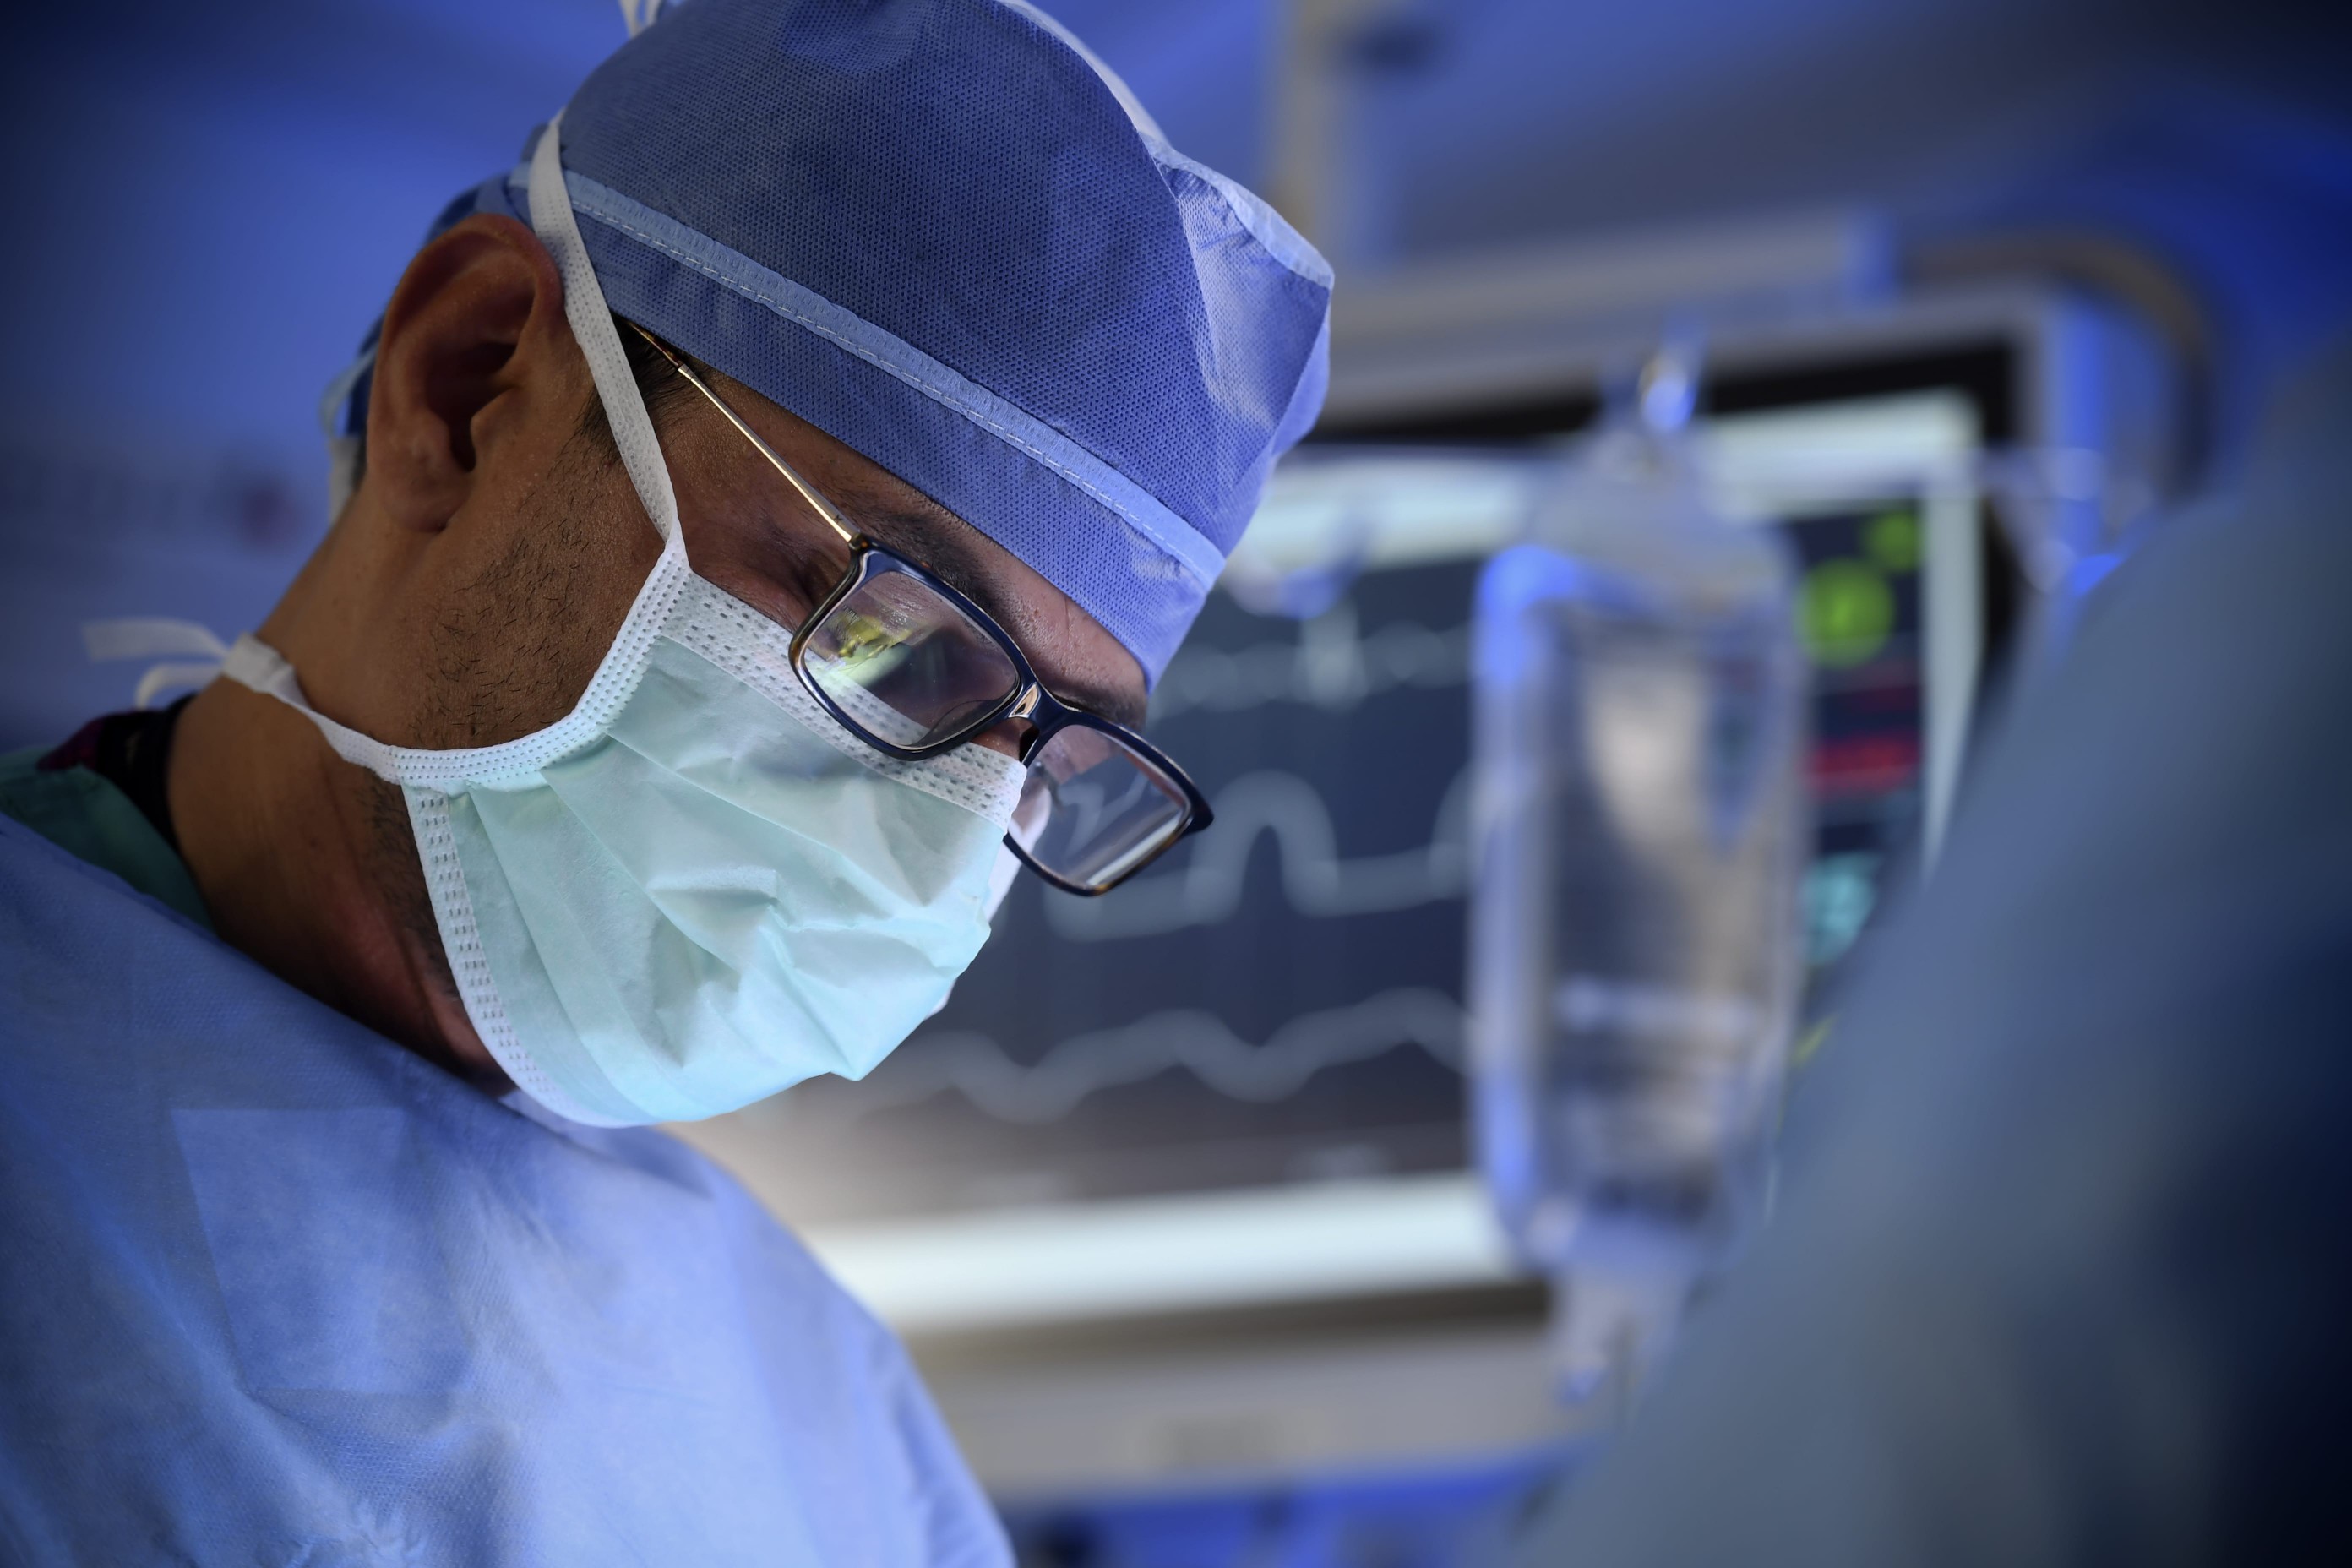 A surgical oncologist in operating attire performs a clinical trial procedure to treat stomach cancer